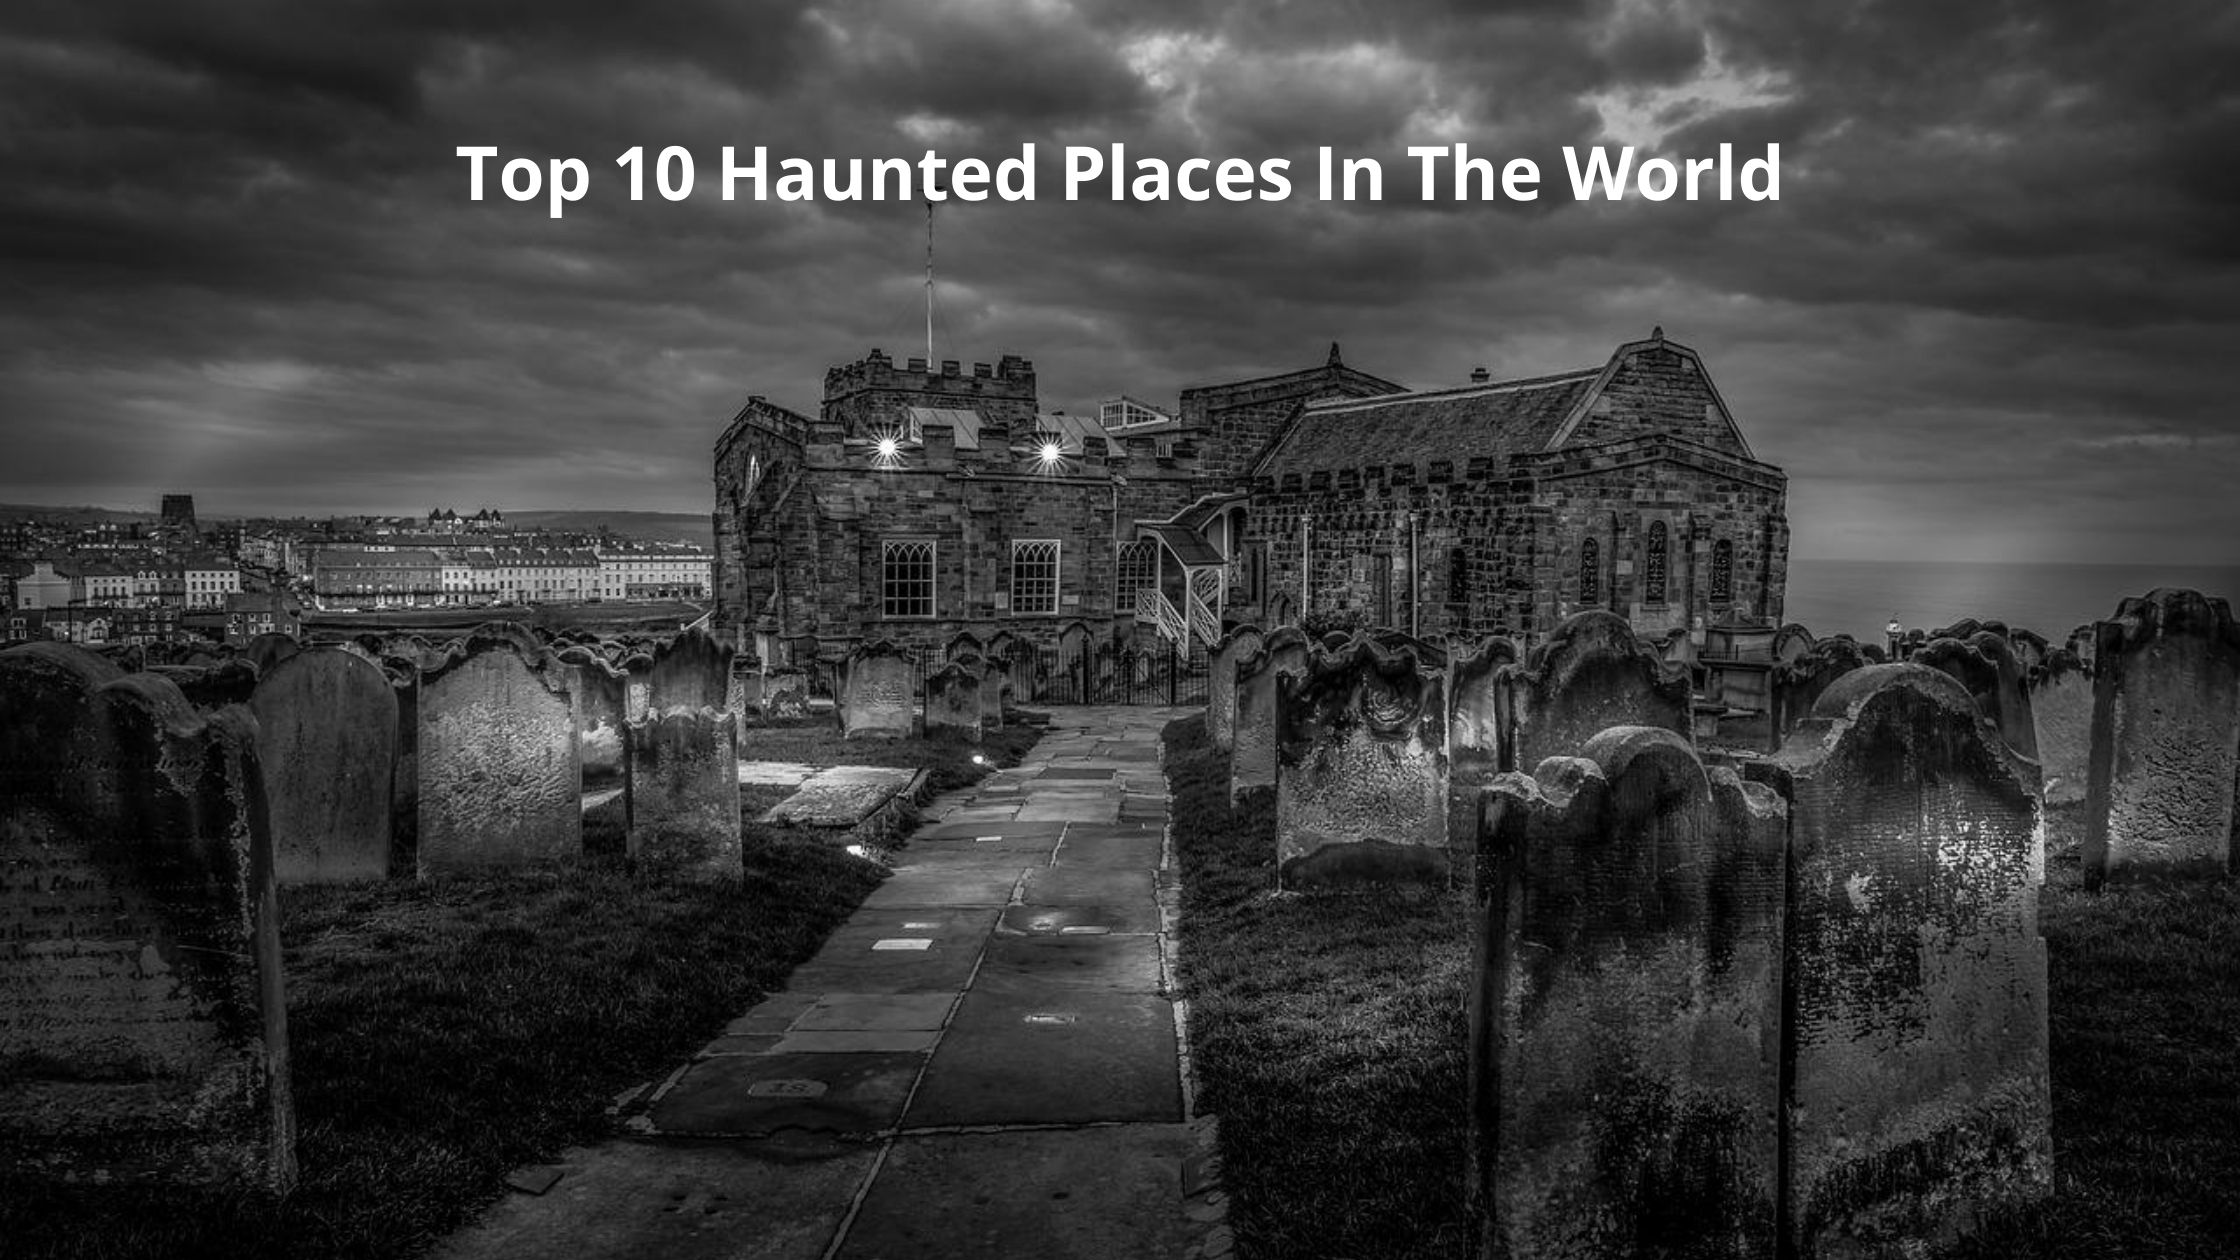 Top 10 Haunted Places In The World